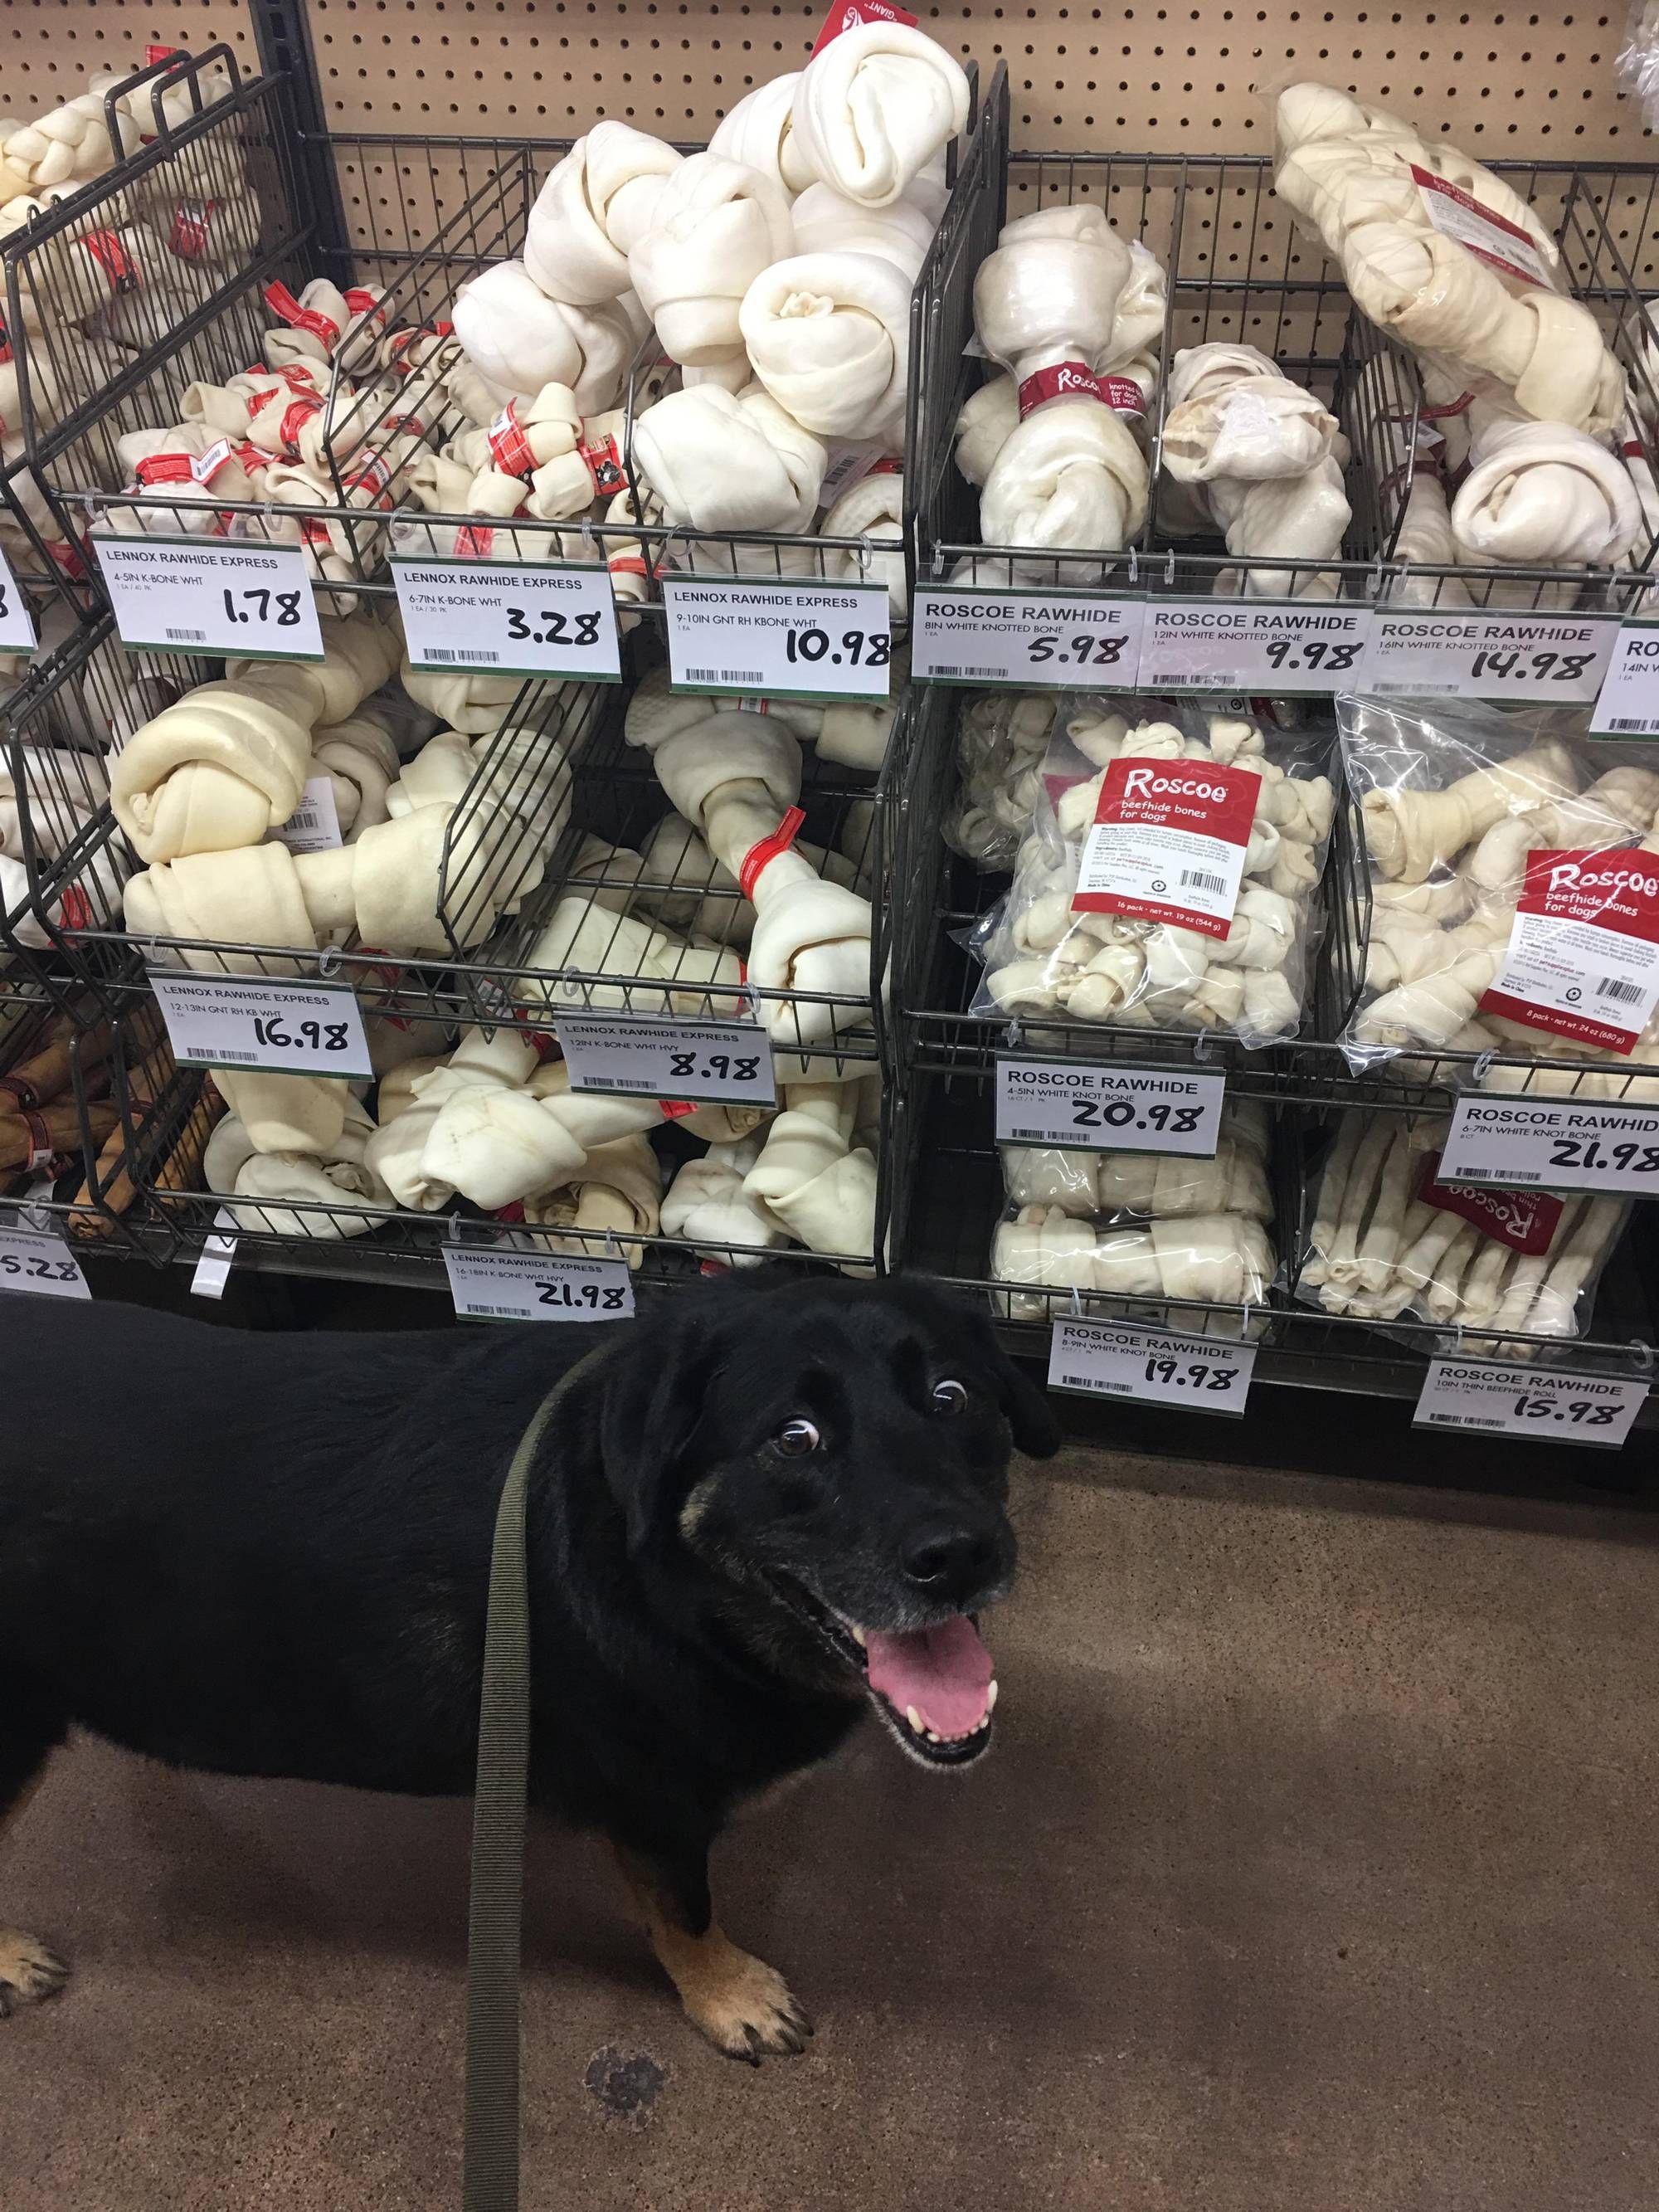 “Can we buy them all???”